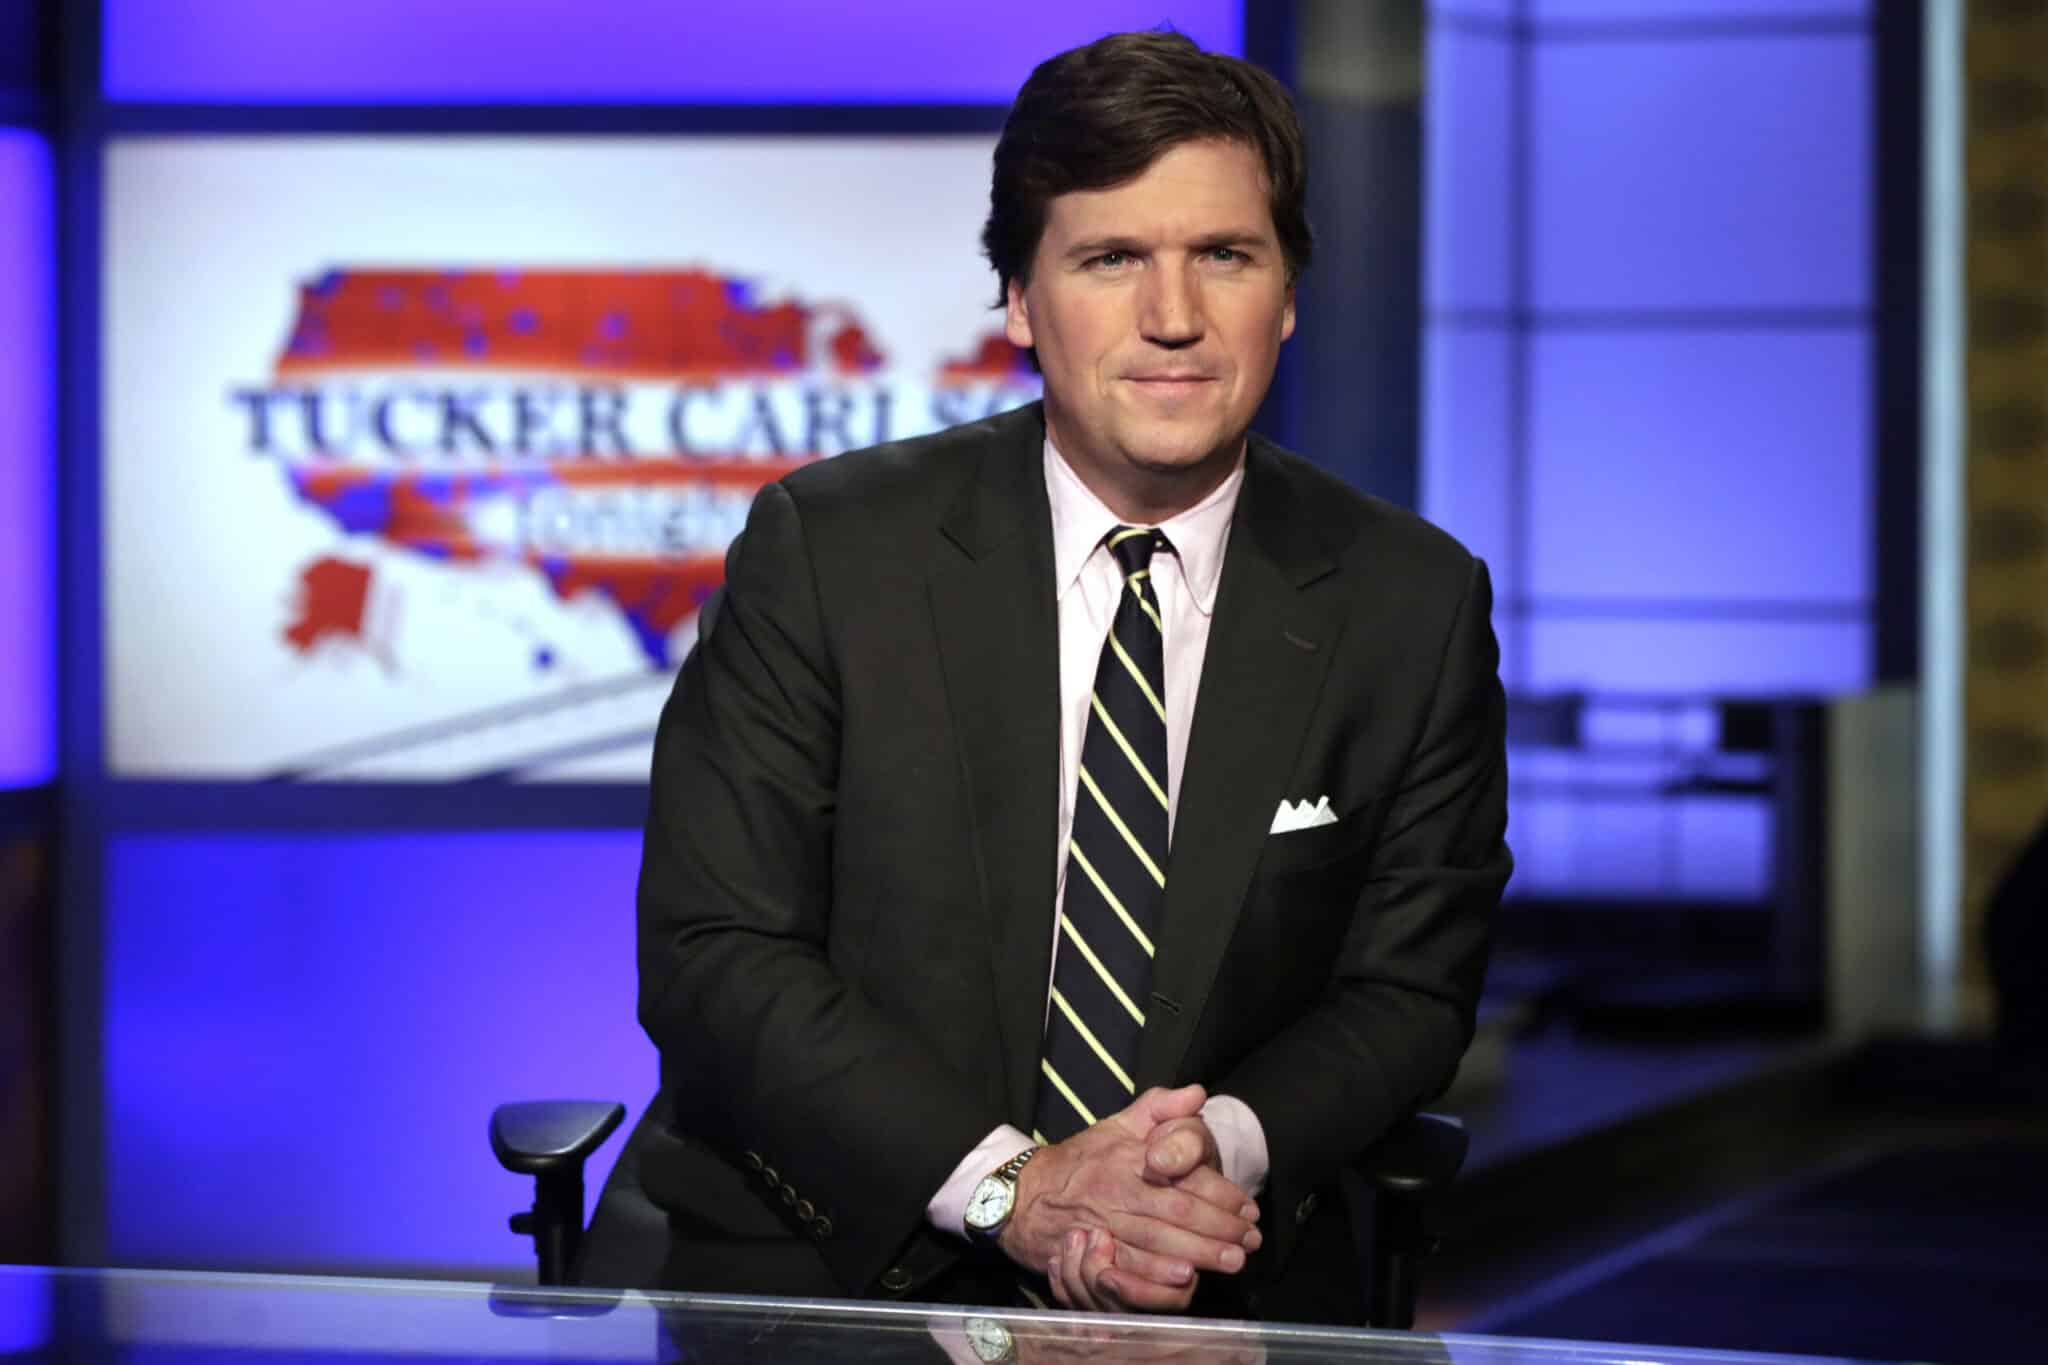 ‘I Hate Him Passionately’: What Tucker Carlson Says About Trump in Private